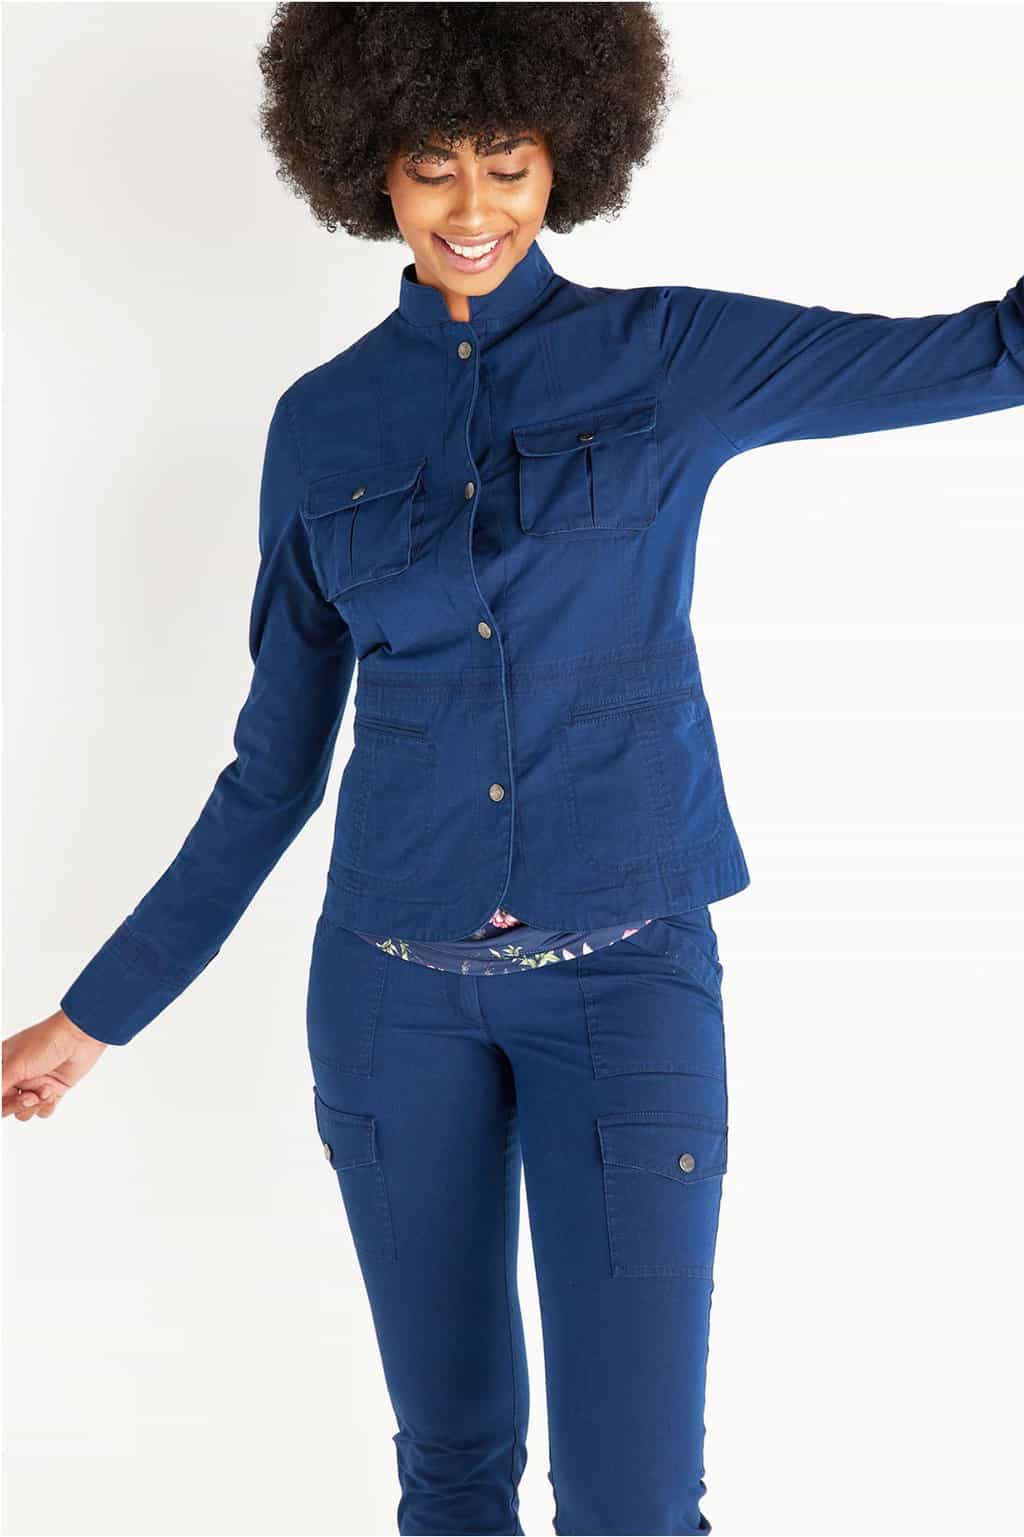 Attractive dark lady with a large afro modelling a blue denim travel outfit with her arms stretched out in a playful fashion. 